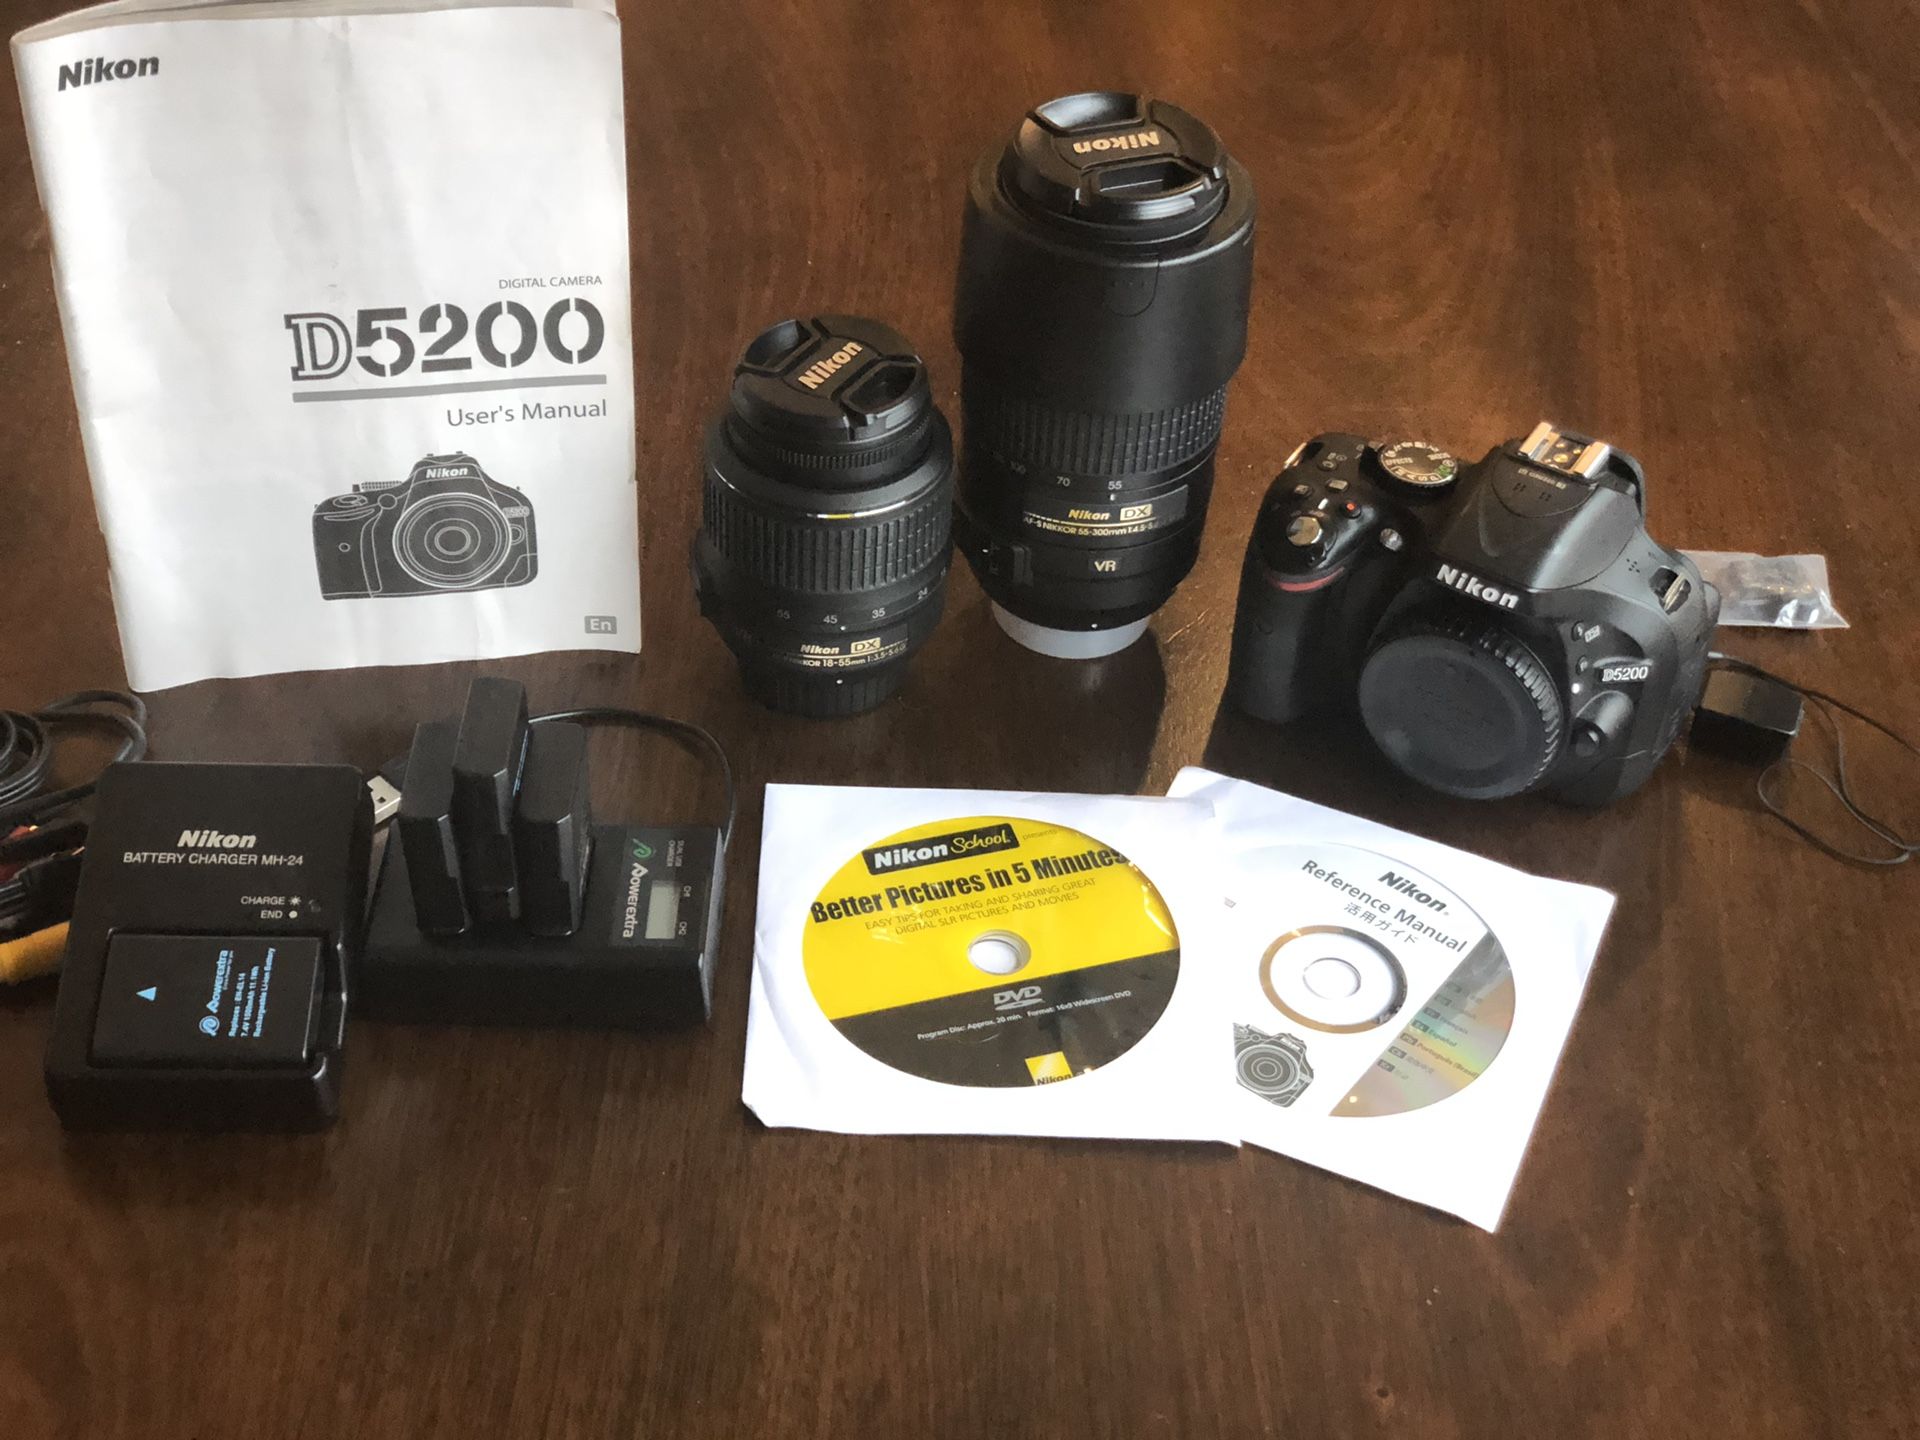 Nikon D5200 Kit with 2 Lenses and all original manuals and DVD’s